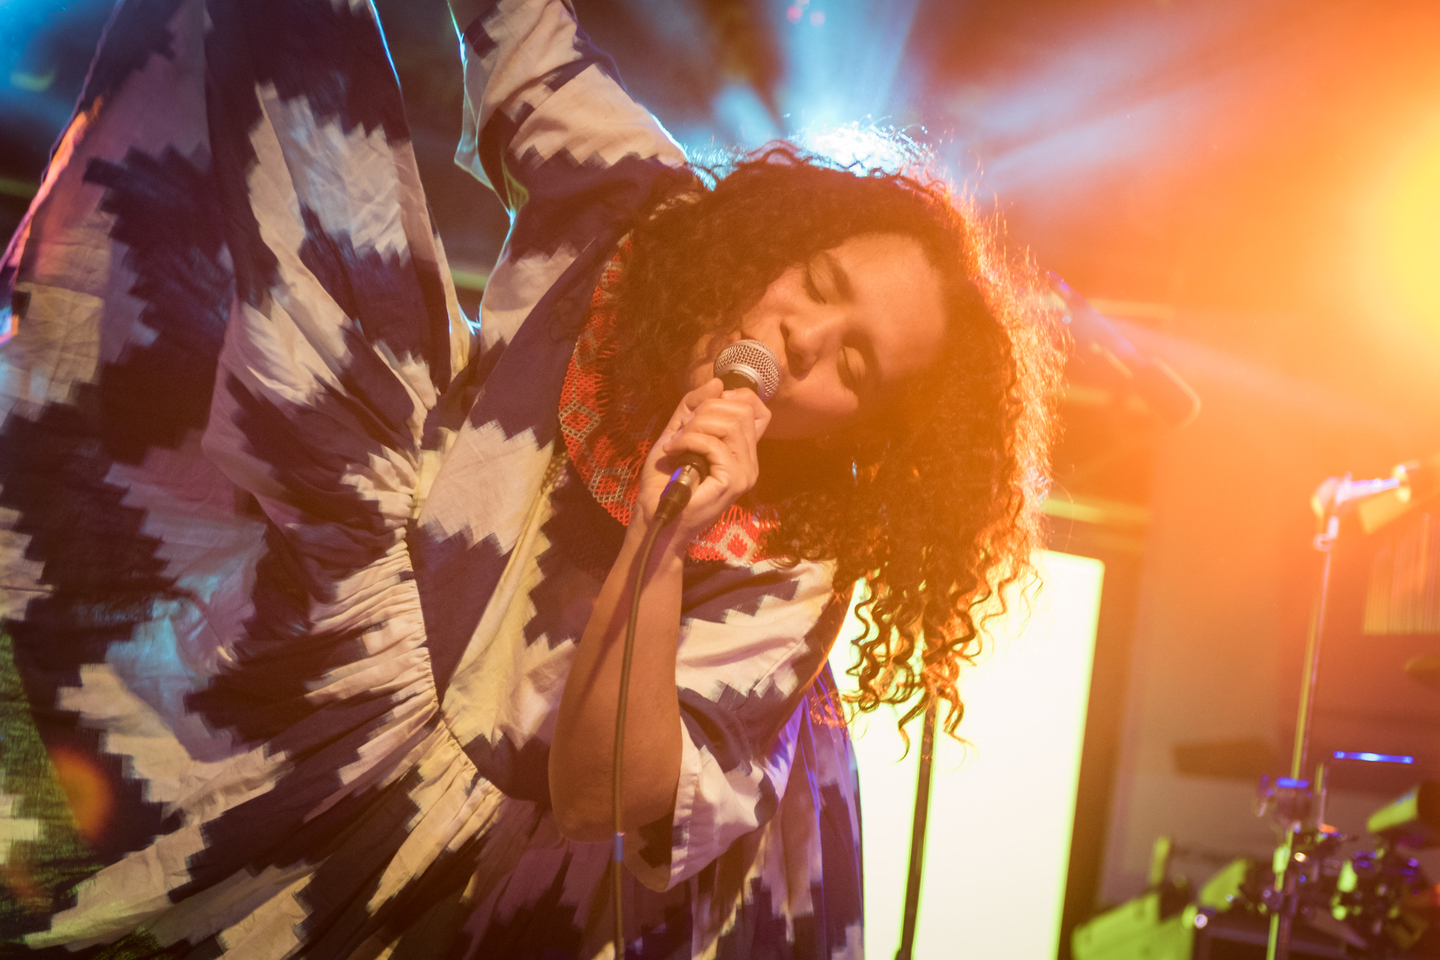 Lido Pimienta, presented by Meow Wolf: Fractallage. Photo by Tico Mendoza